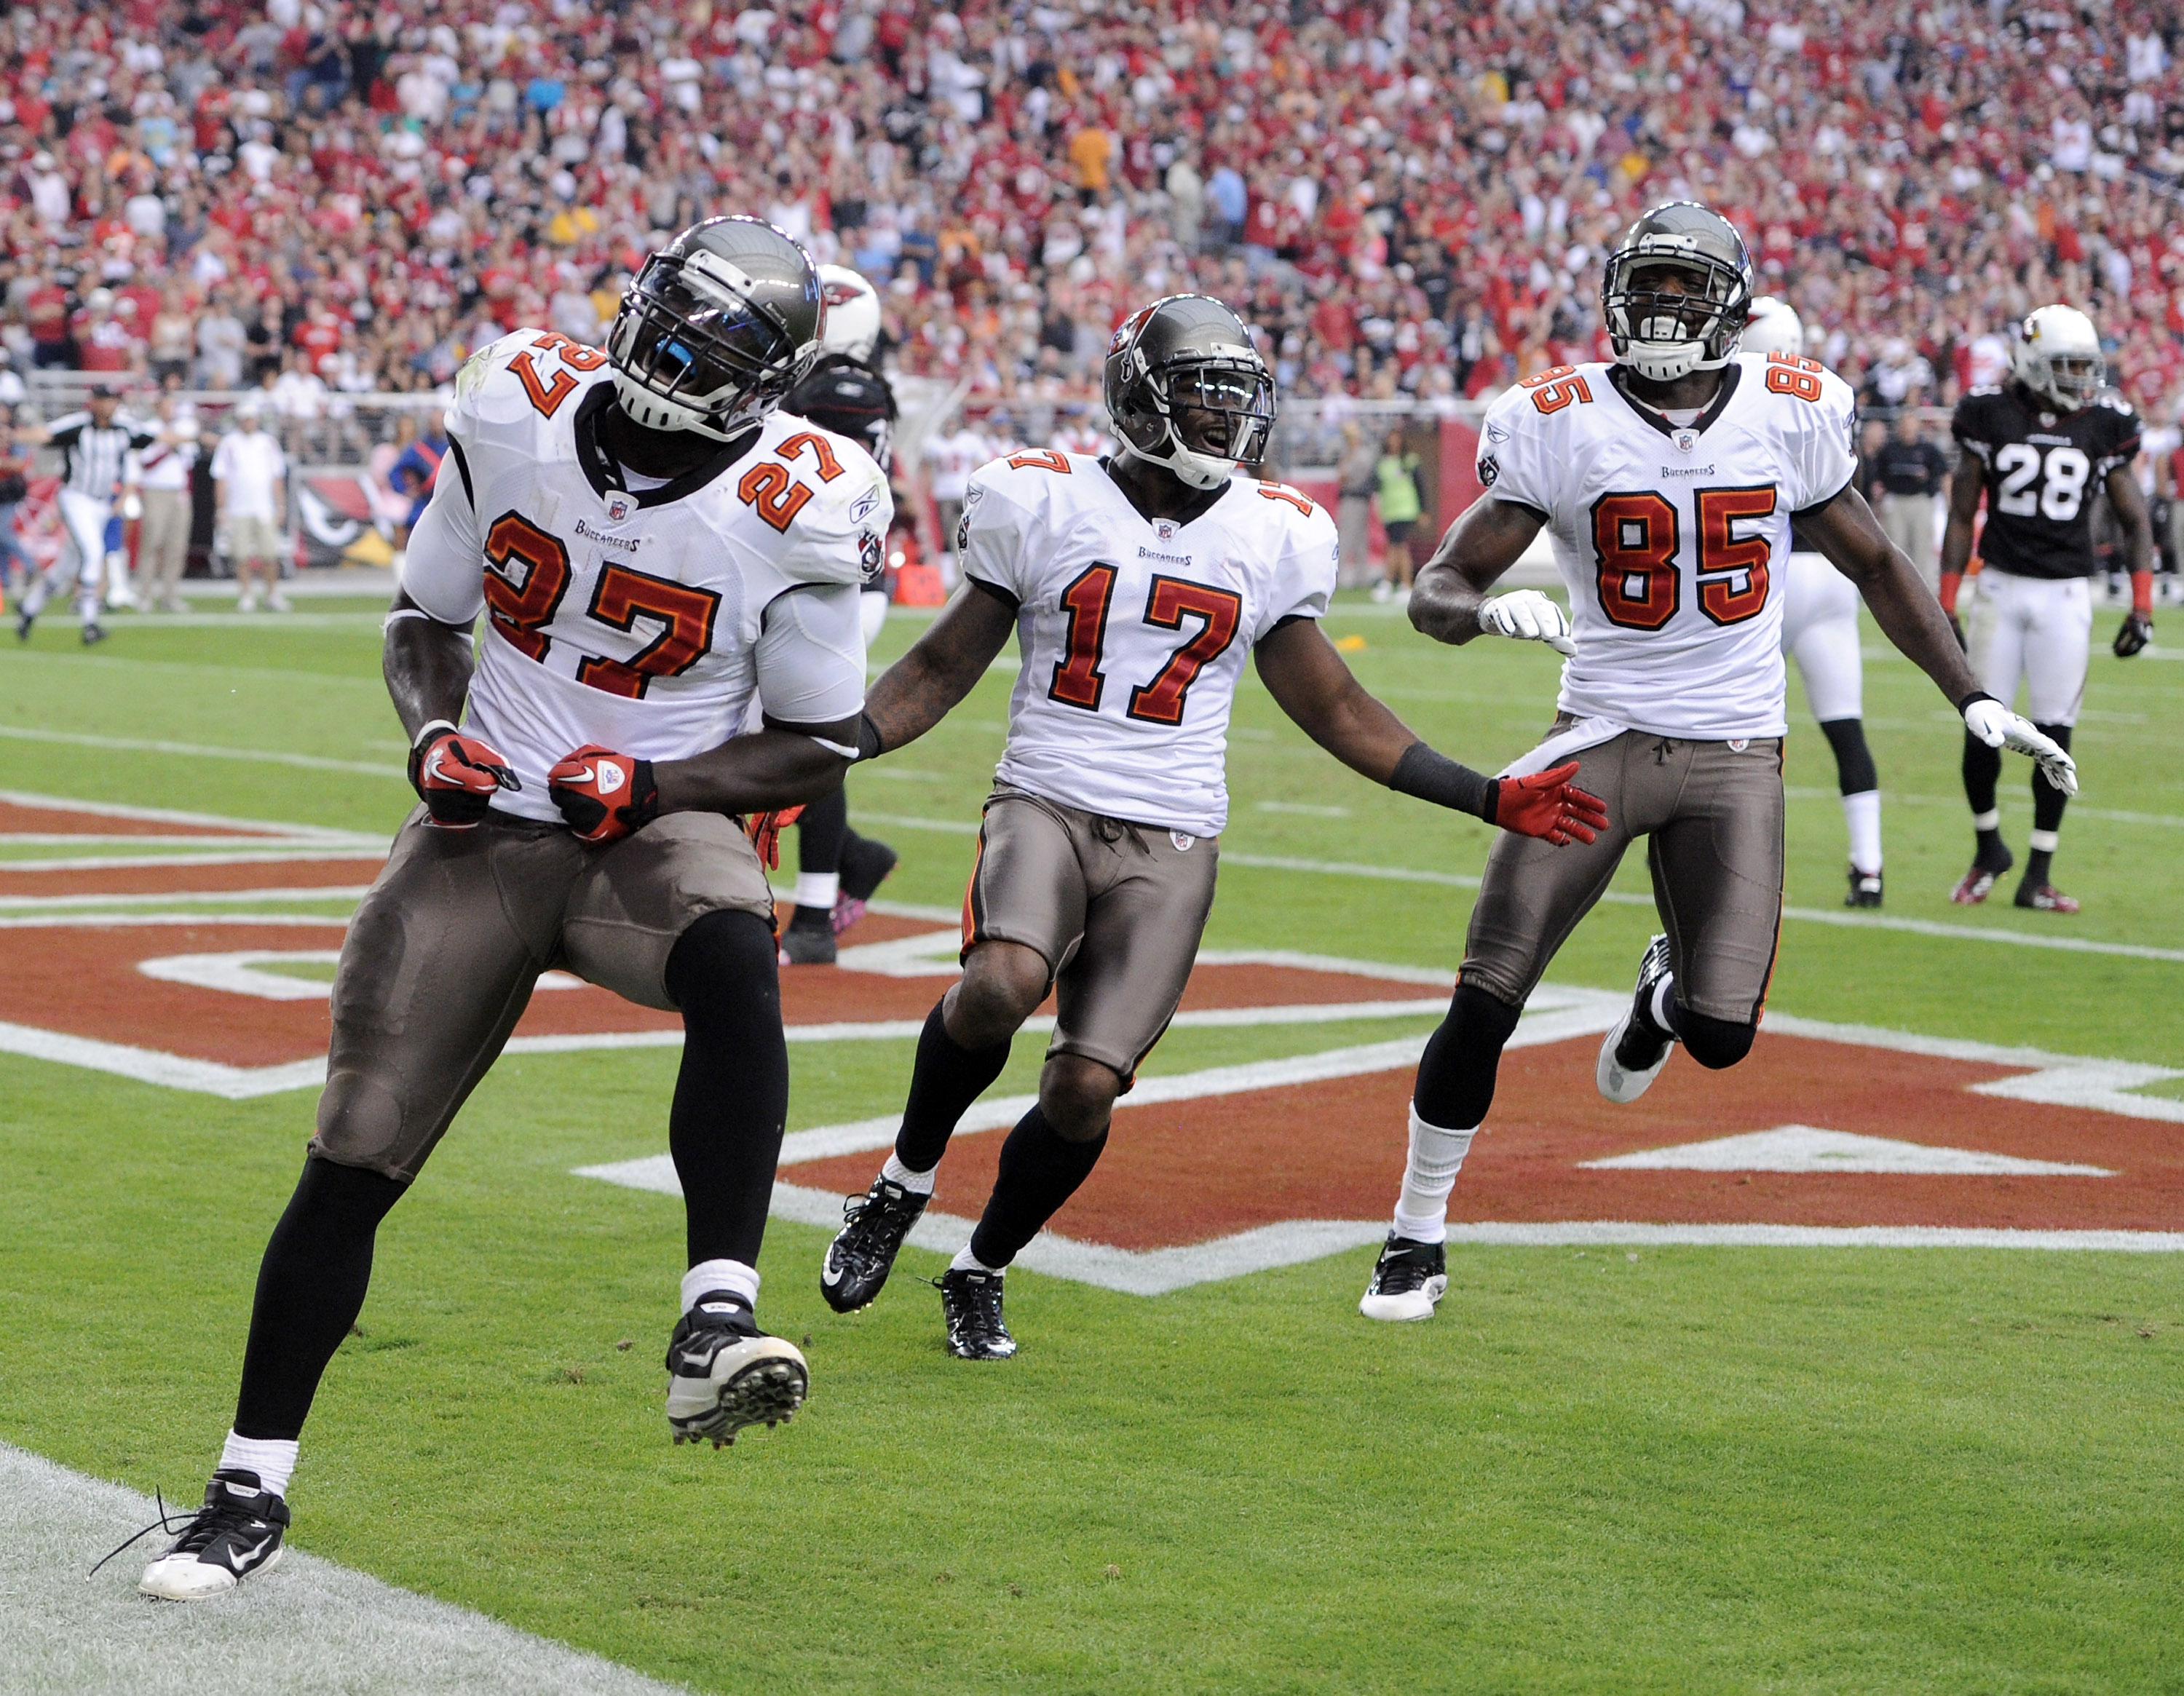 GLENDALE, AZ - OCTOBER 31:  LeGarrette Blount #27 of the Tampa Bay Buccaneers celebrates his touchdown with Arrelious Benn #17 and Maurice Stovall #85 for a 31-14 lead over the Arizona Cardinals during the second quarter at University of Phoenix Stadium o